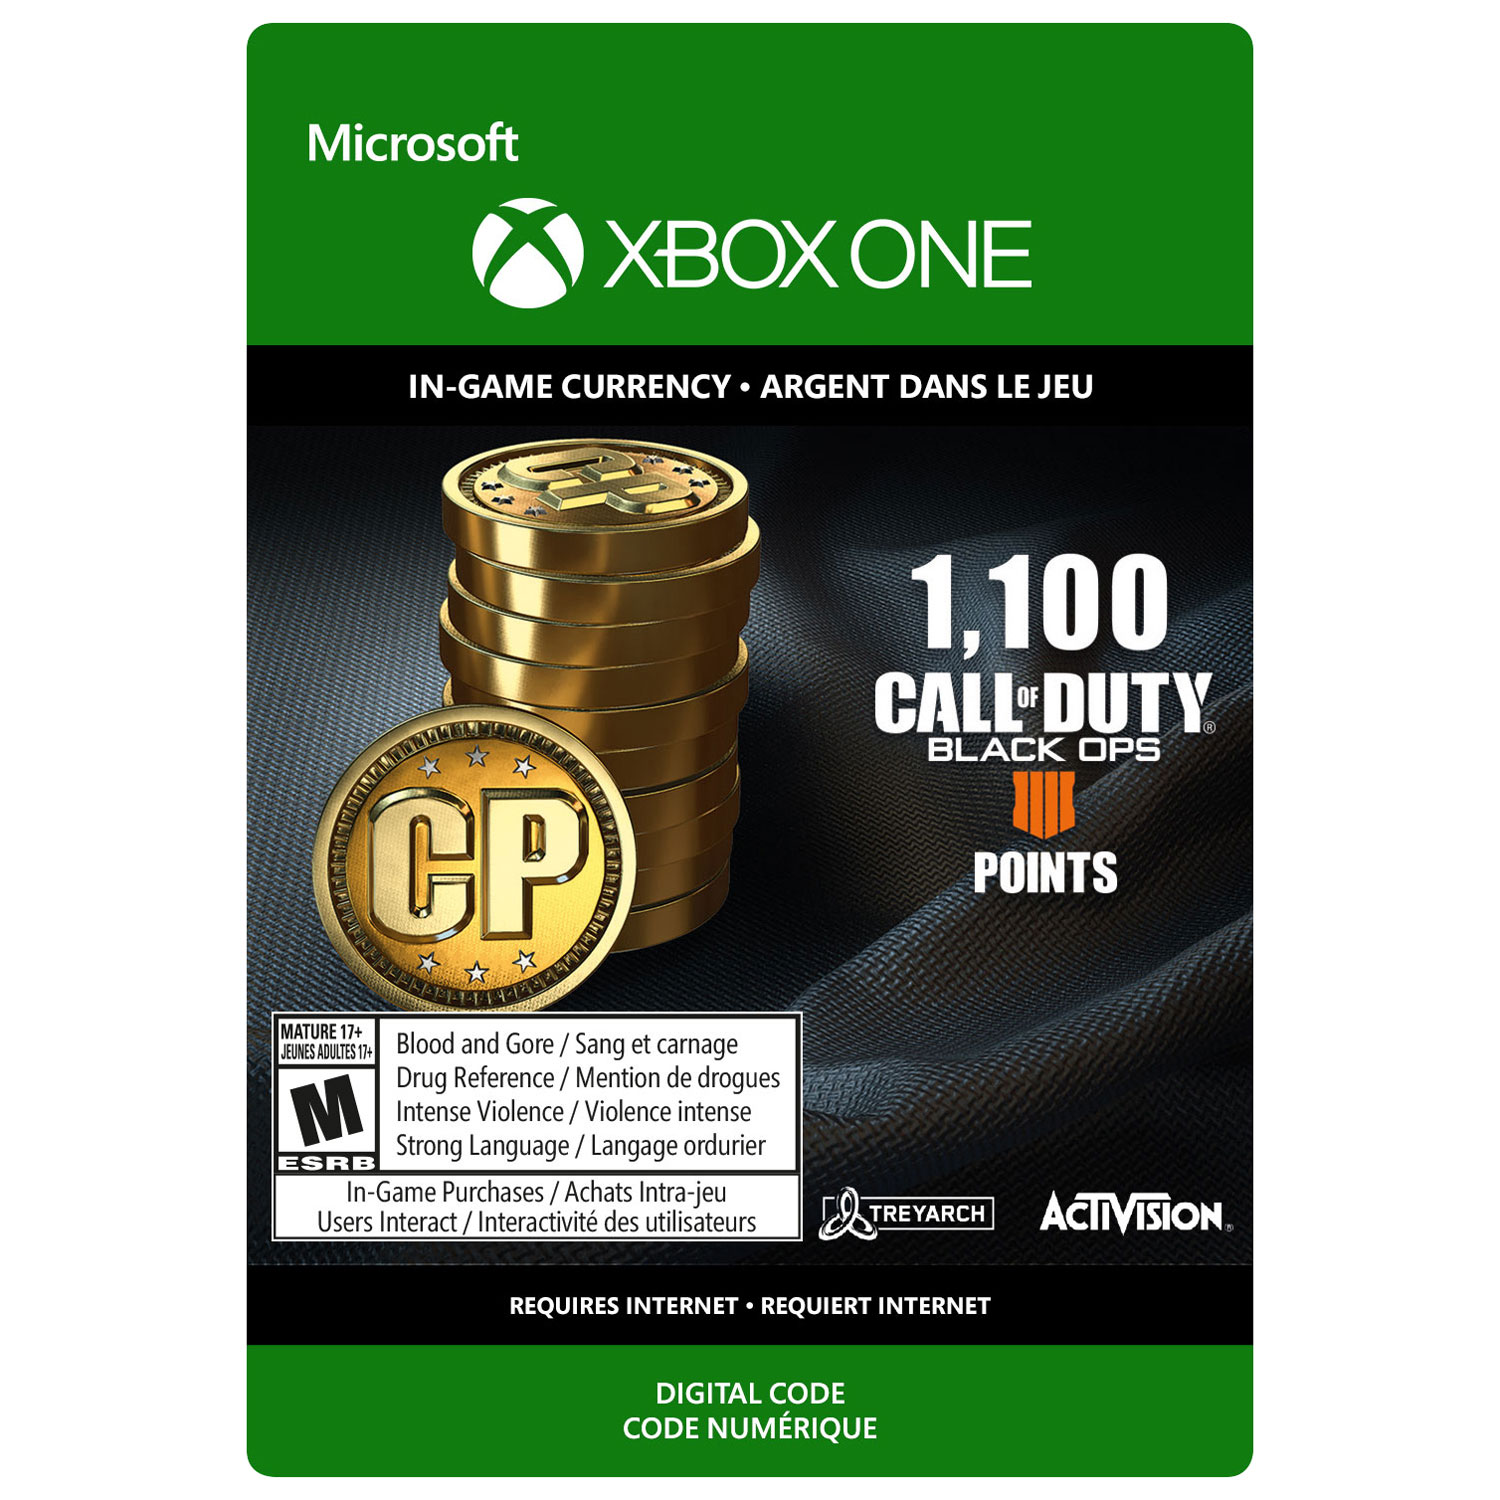 Call of Duty Black Ops 4: 1,100 COD Points (Xbox One) - Digital Download